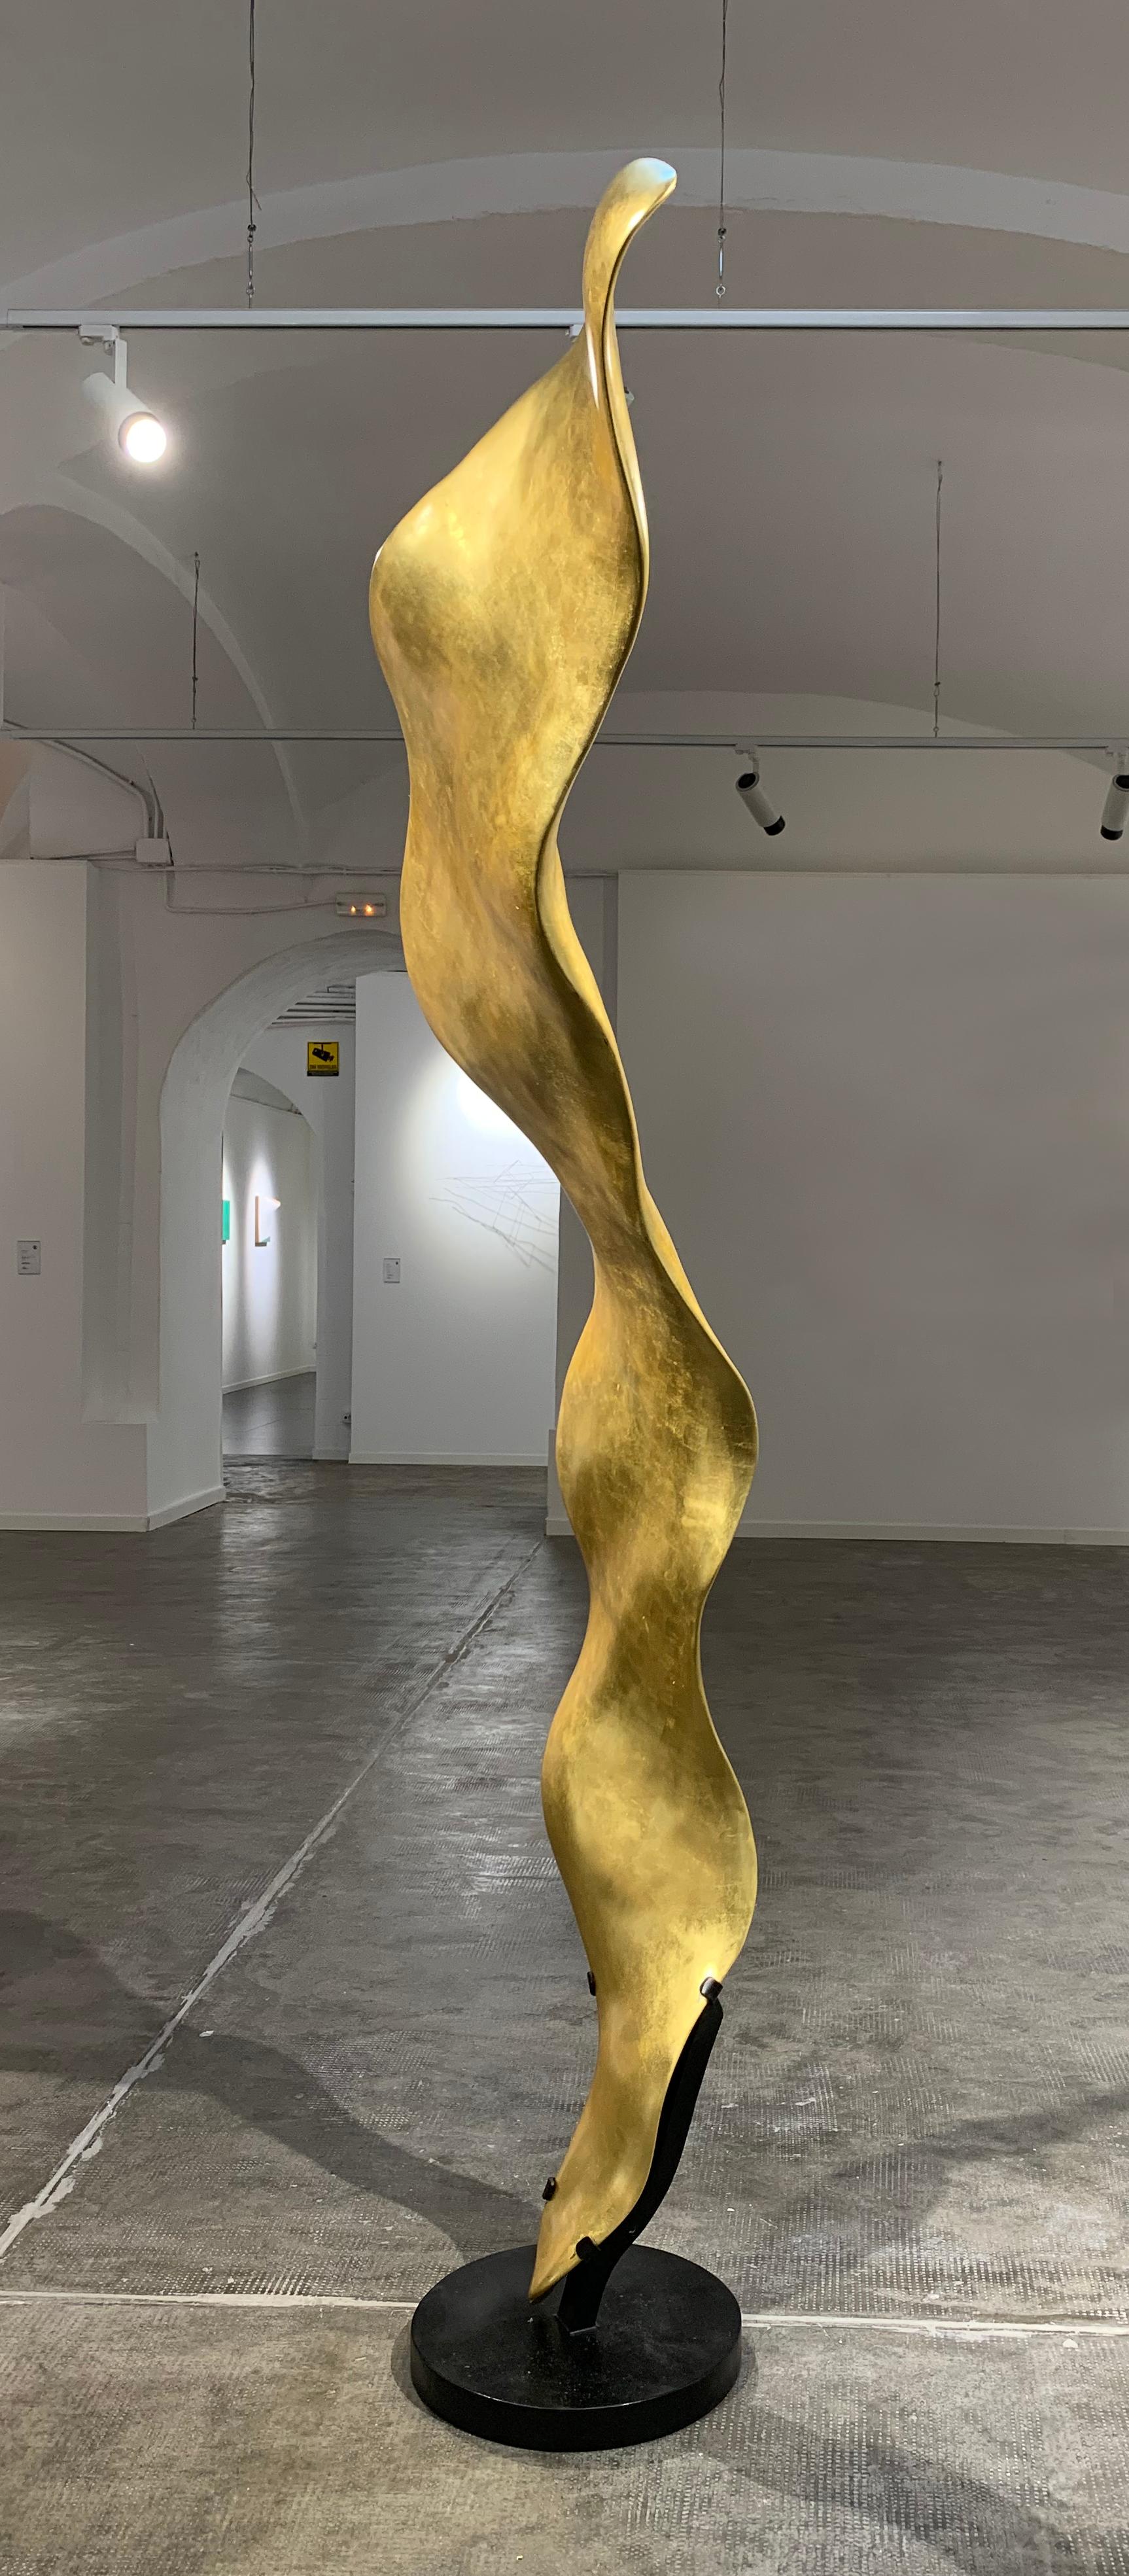 Mahogany roots and gold leaf

The Joaquim Ingravidesa Sculpture Alliance is formed by an international group of sculptors and designers who collaborate to create abstract sculpture inspired by nature. They often work together for months on